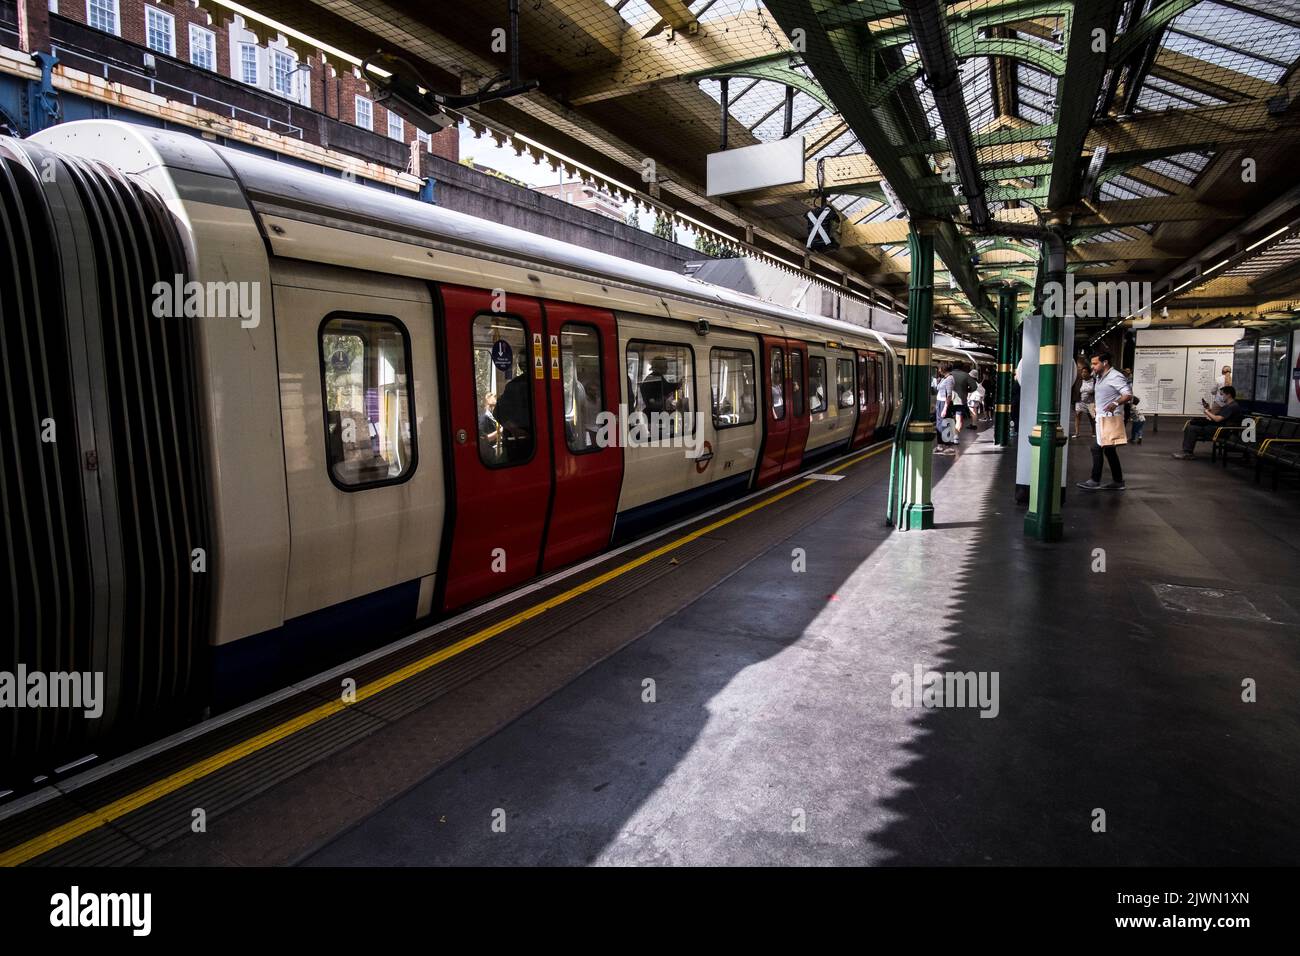 A London Underground train at the platform of South Kensington station on the Circle Line Stock Photo